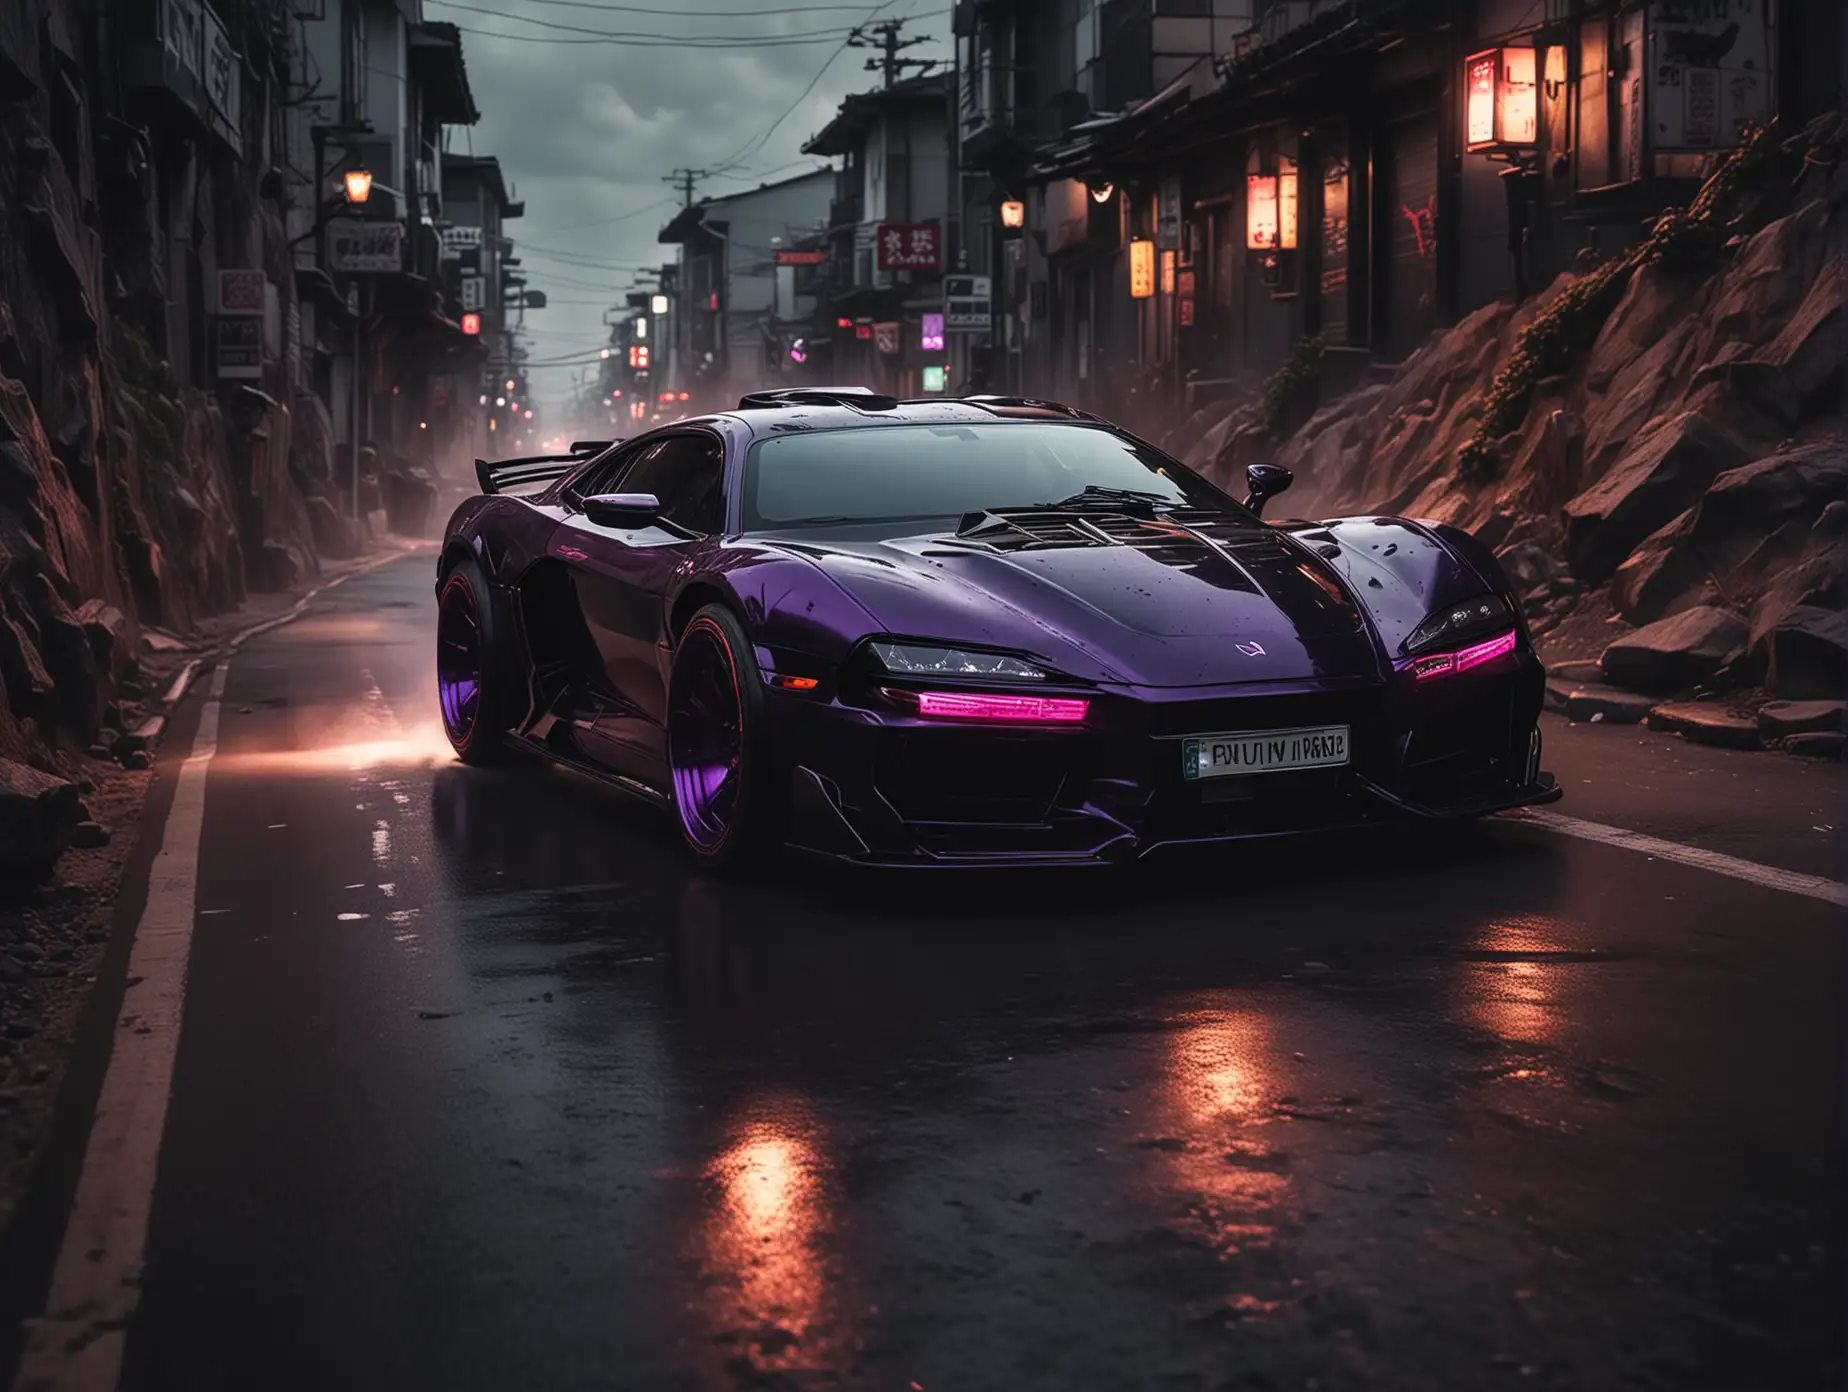 Create  futuristic cars from   puma & spiderman evil tuning type drifting  on Downhill in Tokyo rear view from high far away,  car color black,  dark violet lights on car